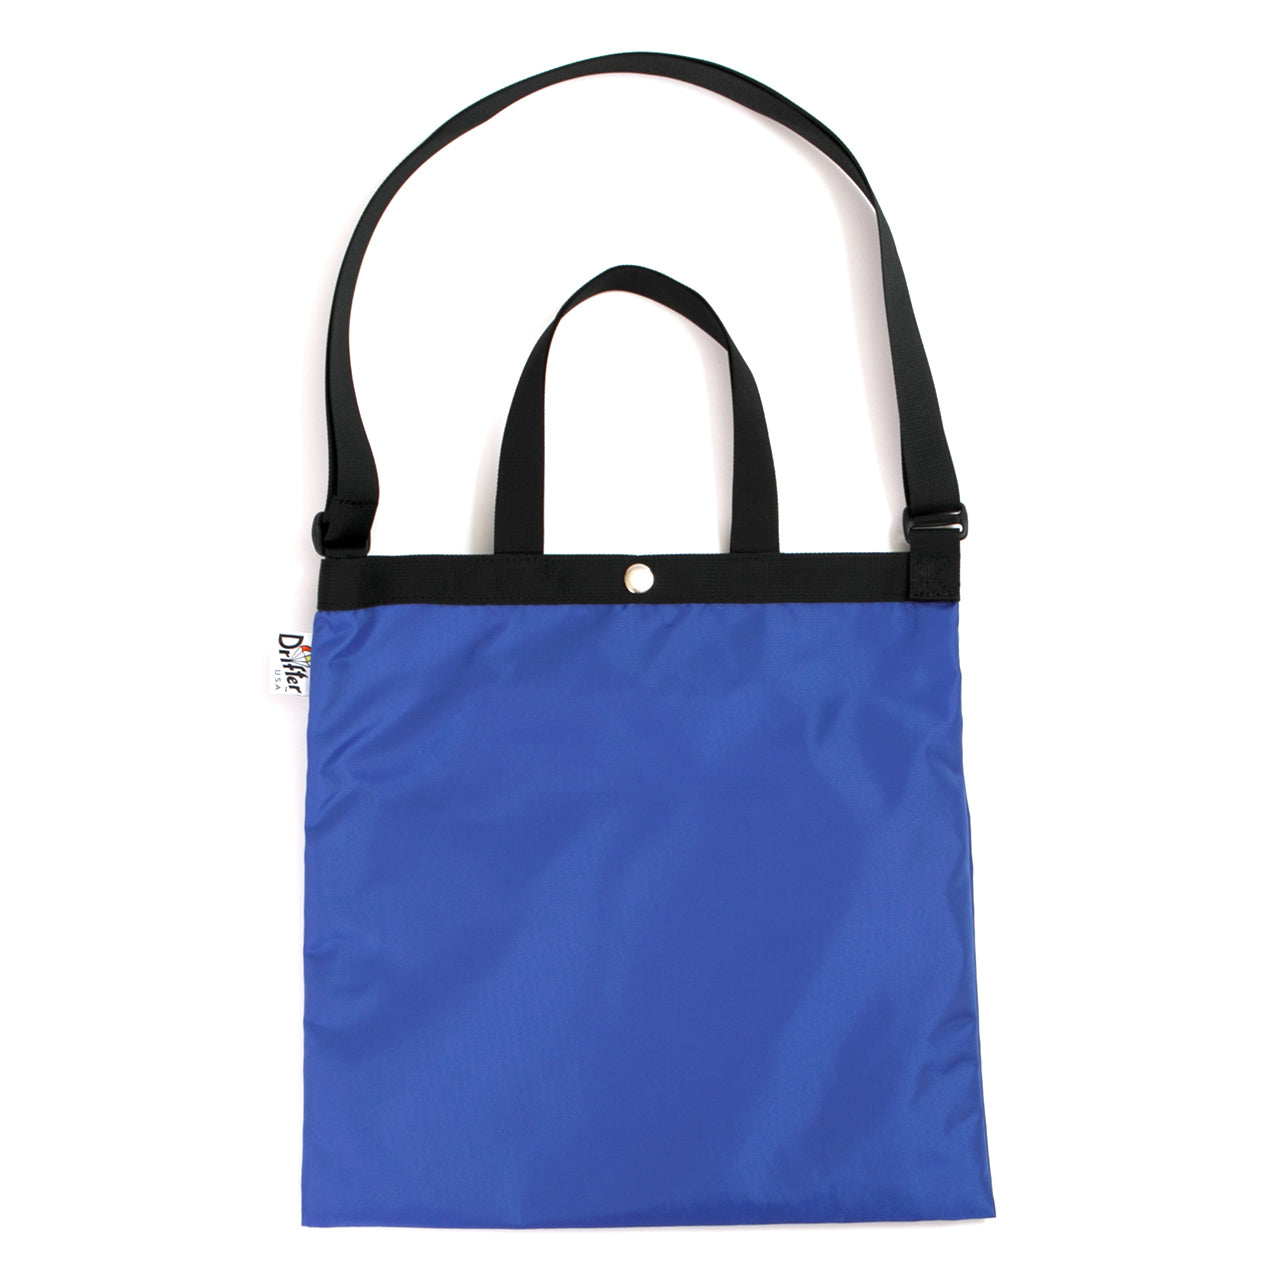 ELEMENTARY TOTE